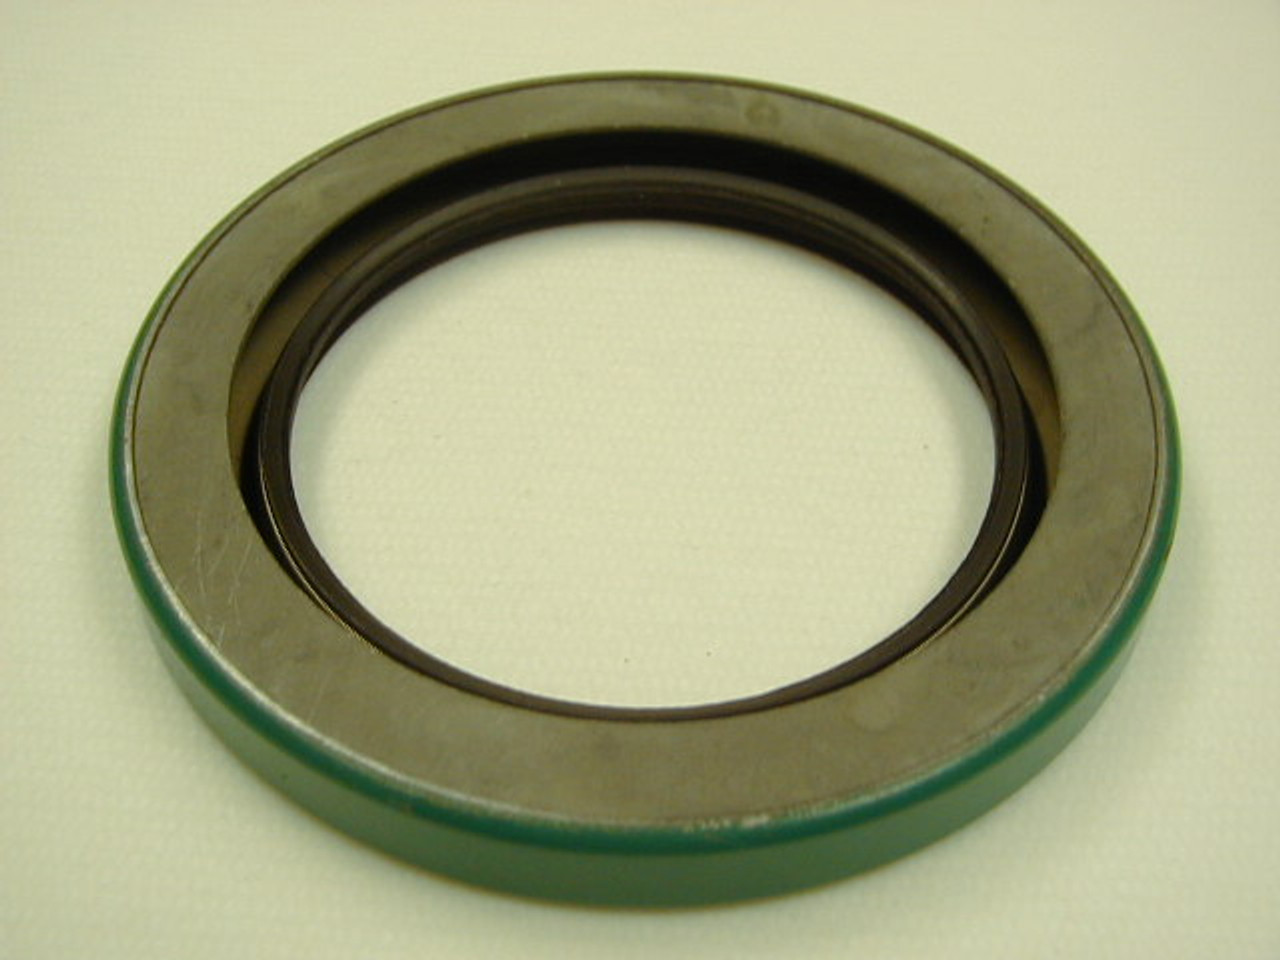 0.882" (22.4mm) Inch Reinforced Metal Double Lip Nitrile Oil Seal  9000 CRWHA1 R